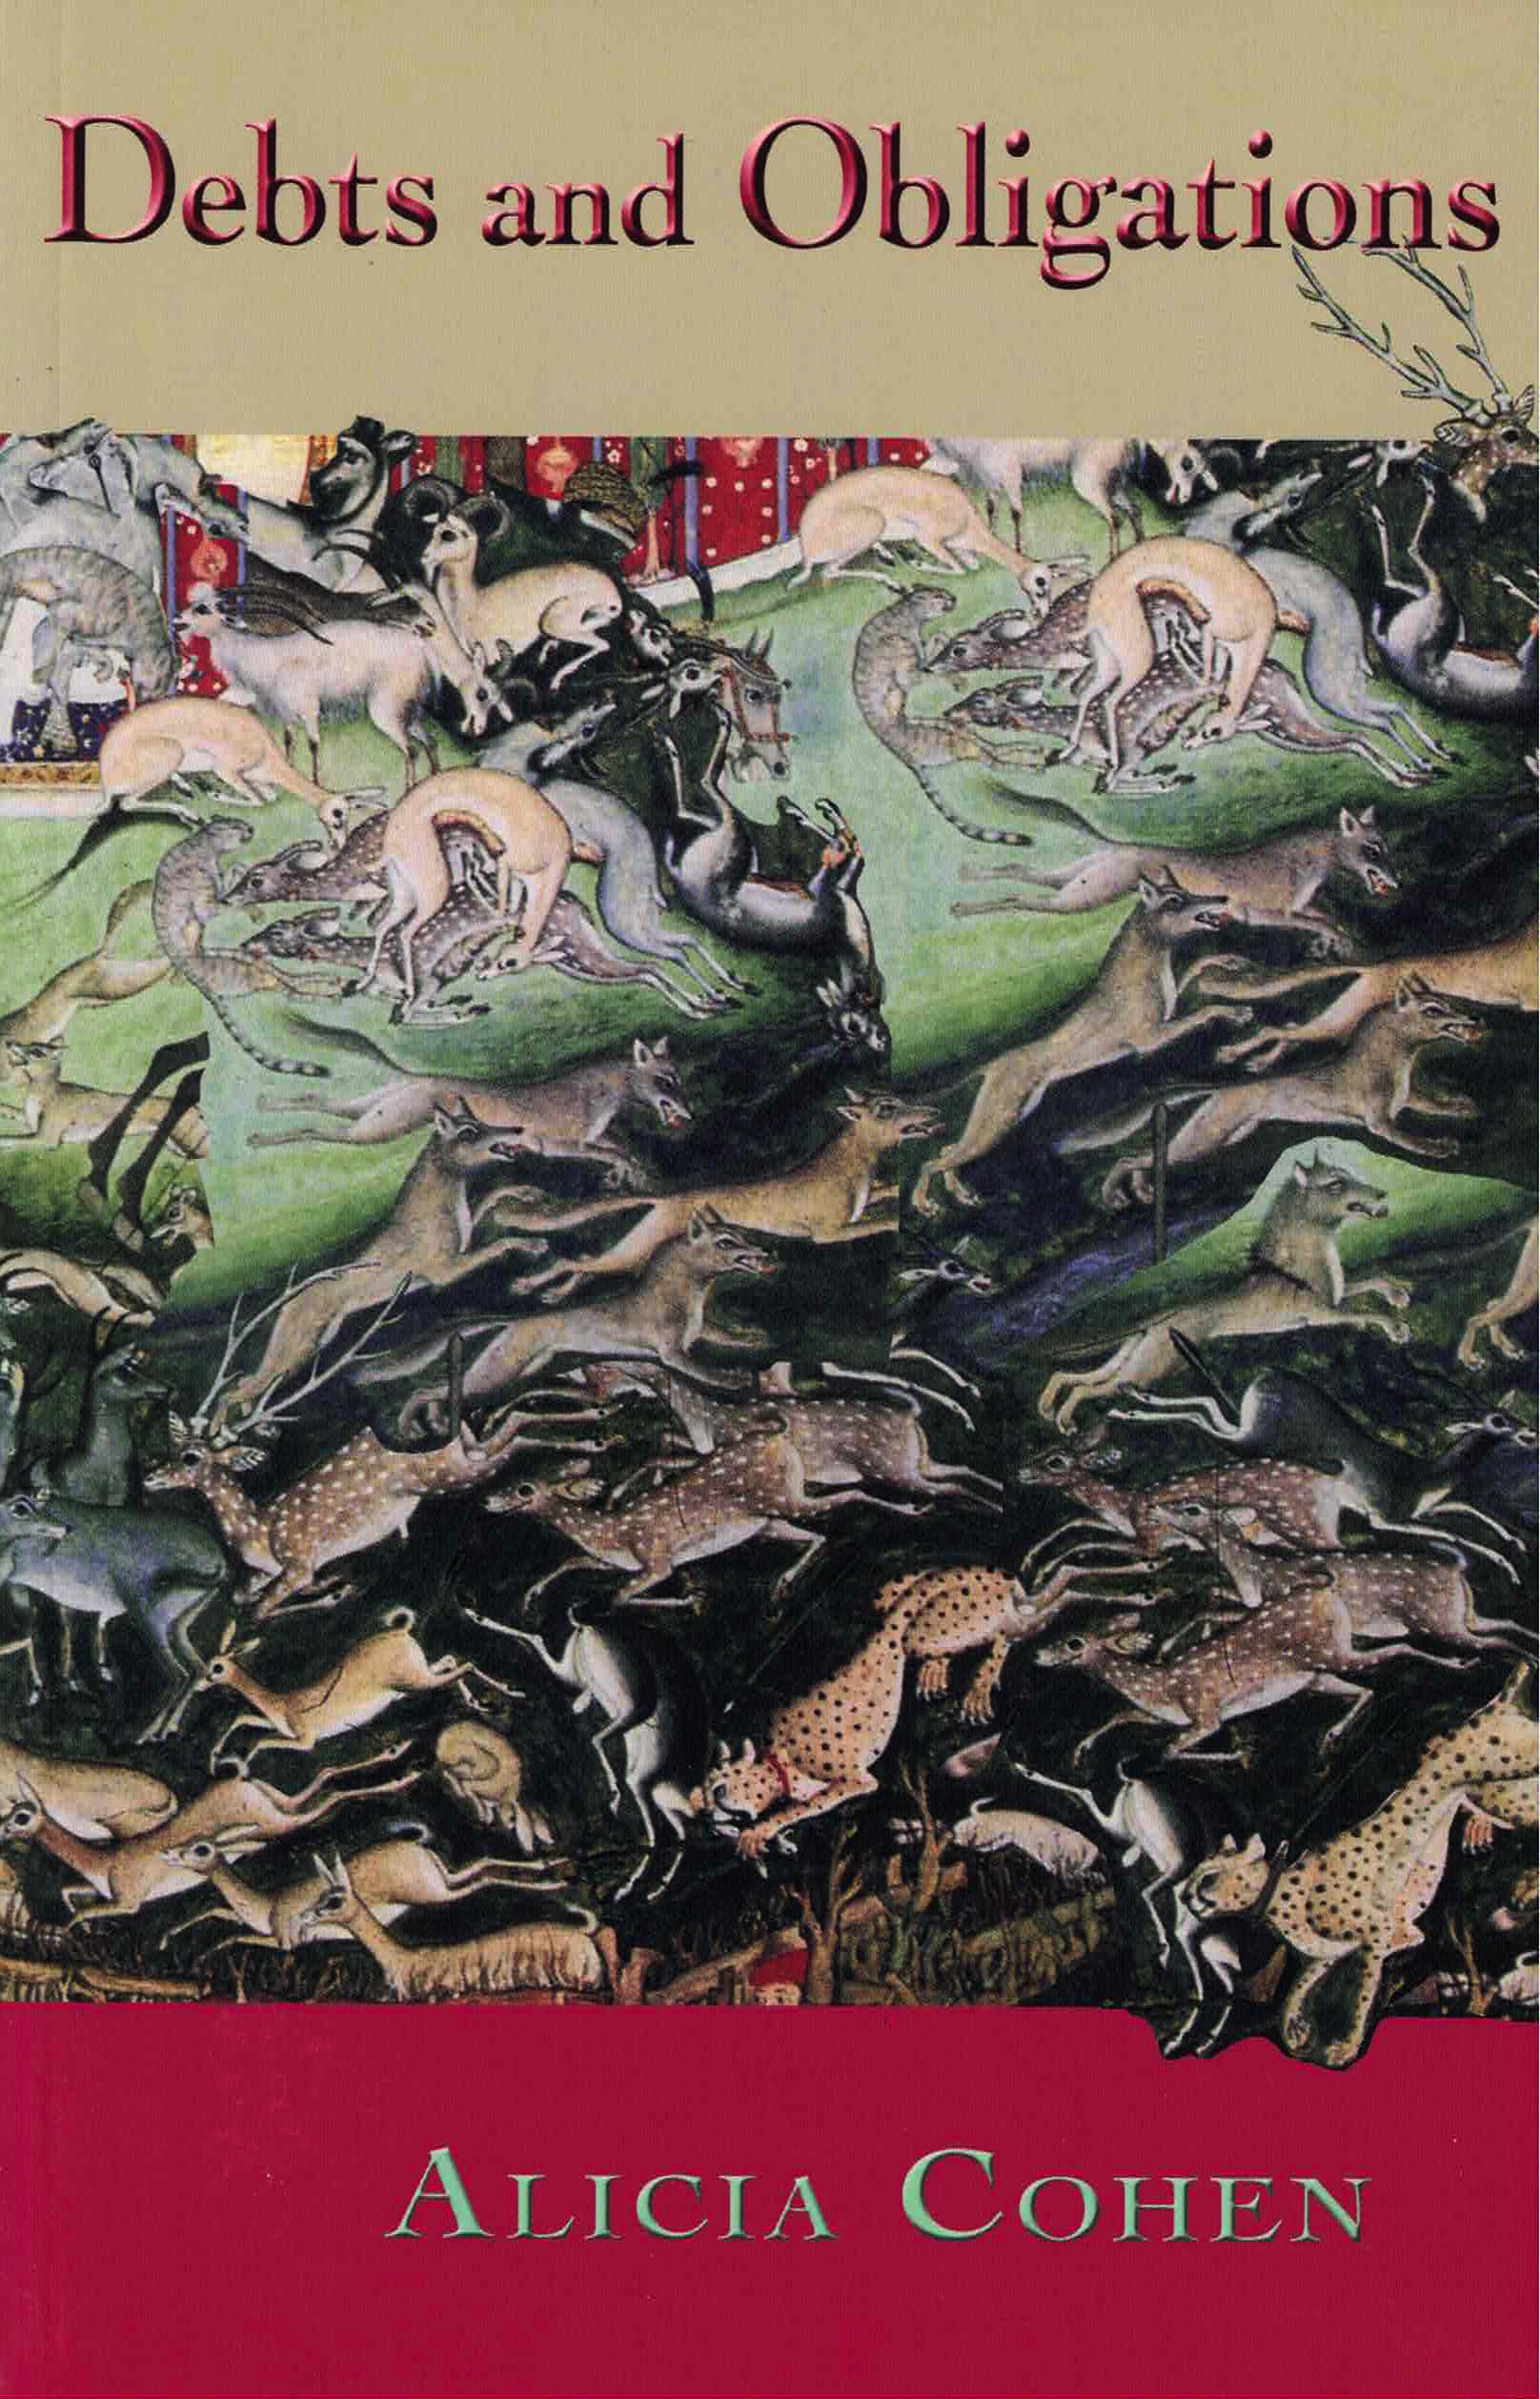 cover of Debts and Obligations by Alicia Cohen; detailed painting of fleeing prey animals with predator animals in pursuit and hunting